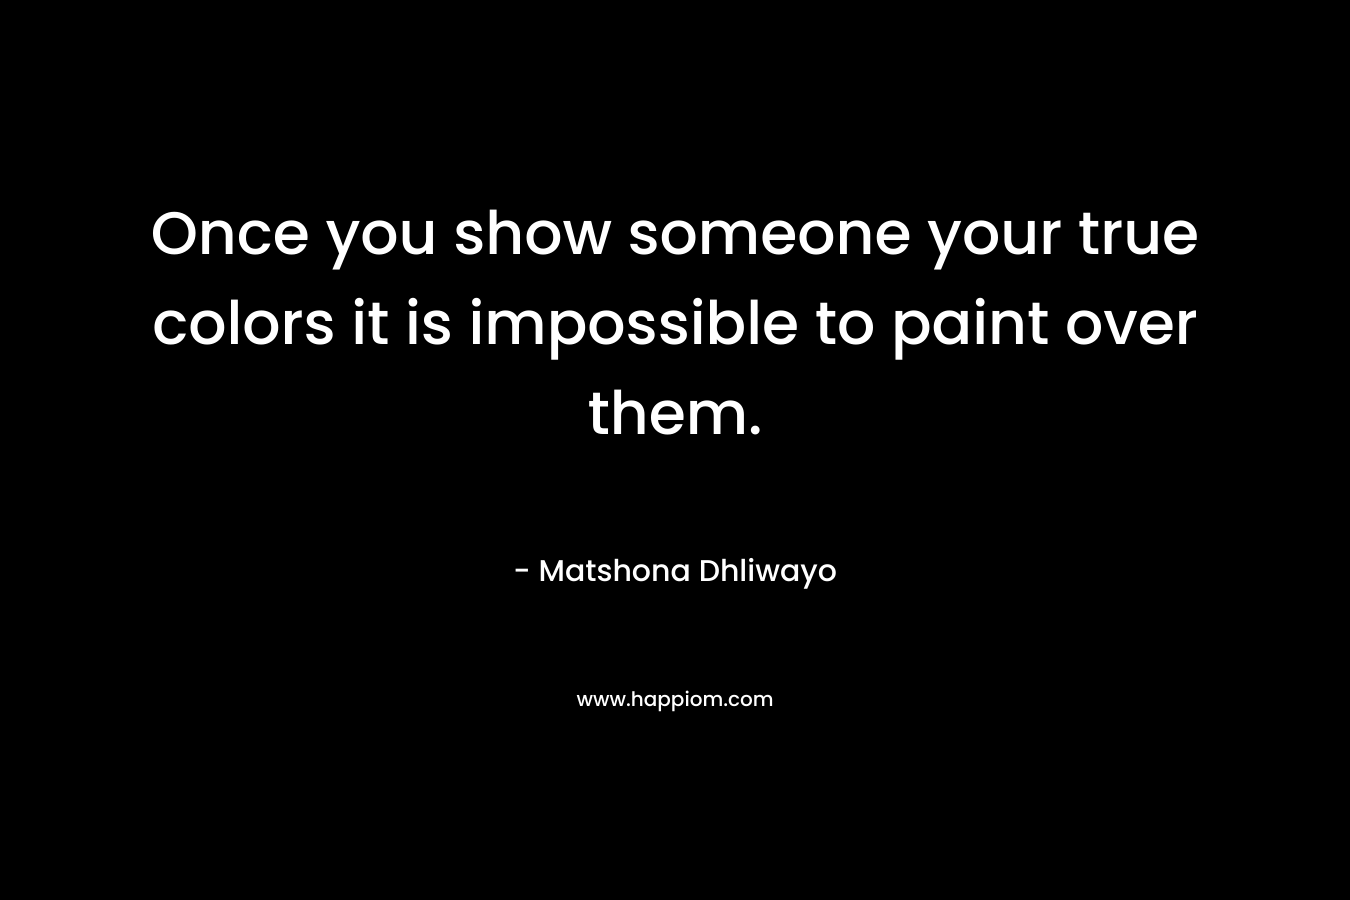 Once you show someone your true colors it is impossible to paint over them.